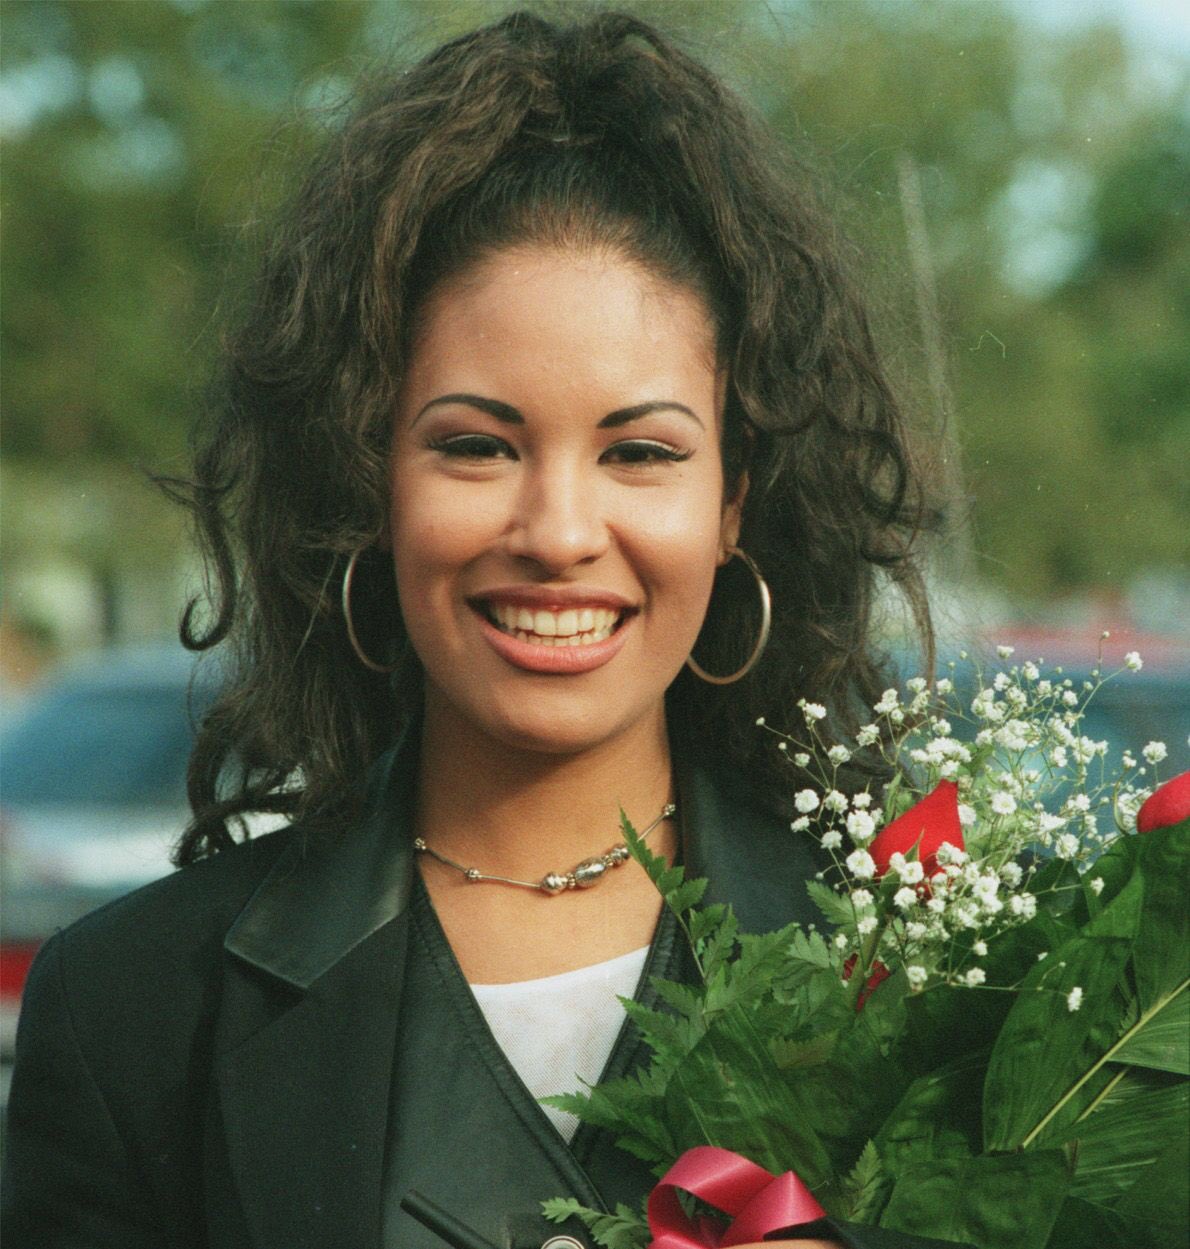 Happy Birthday to La Reina Selena Quintanilla, resting in heaven as you live on in our hearts      